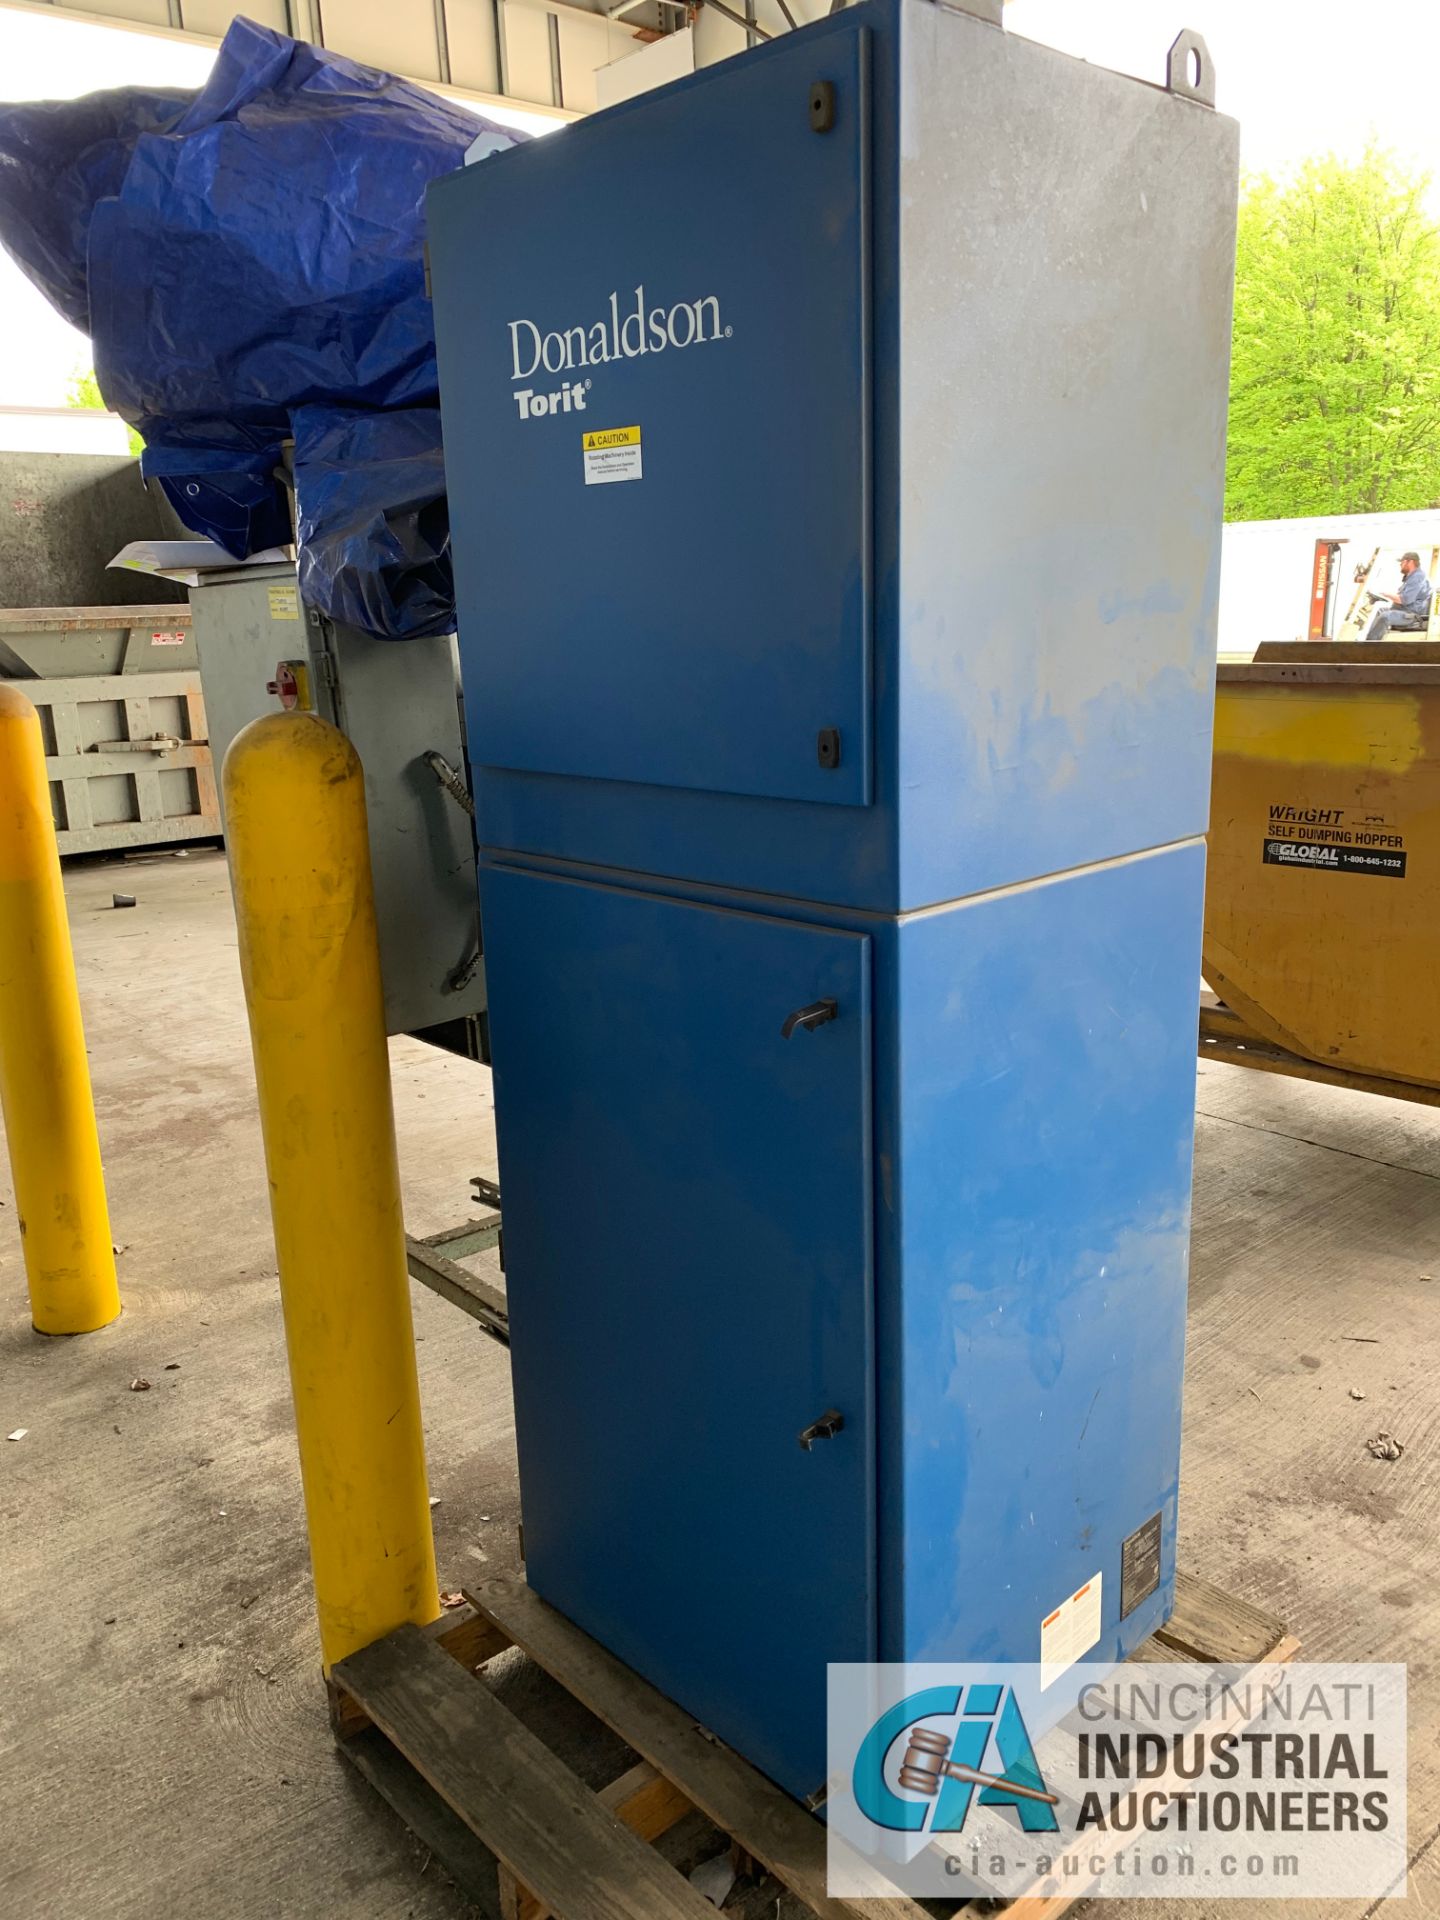 TORIT MODEL MDV 1 DUST COLLECTOR; S/N 12338966 L1, 3HP **RIGGING FEE DUE TO SHOEMAKER $75.00**